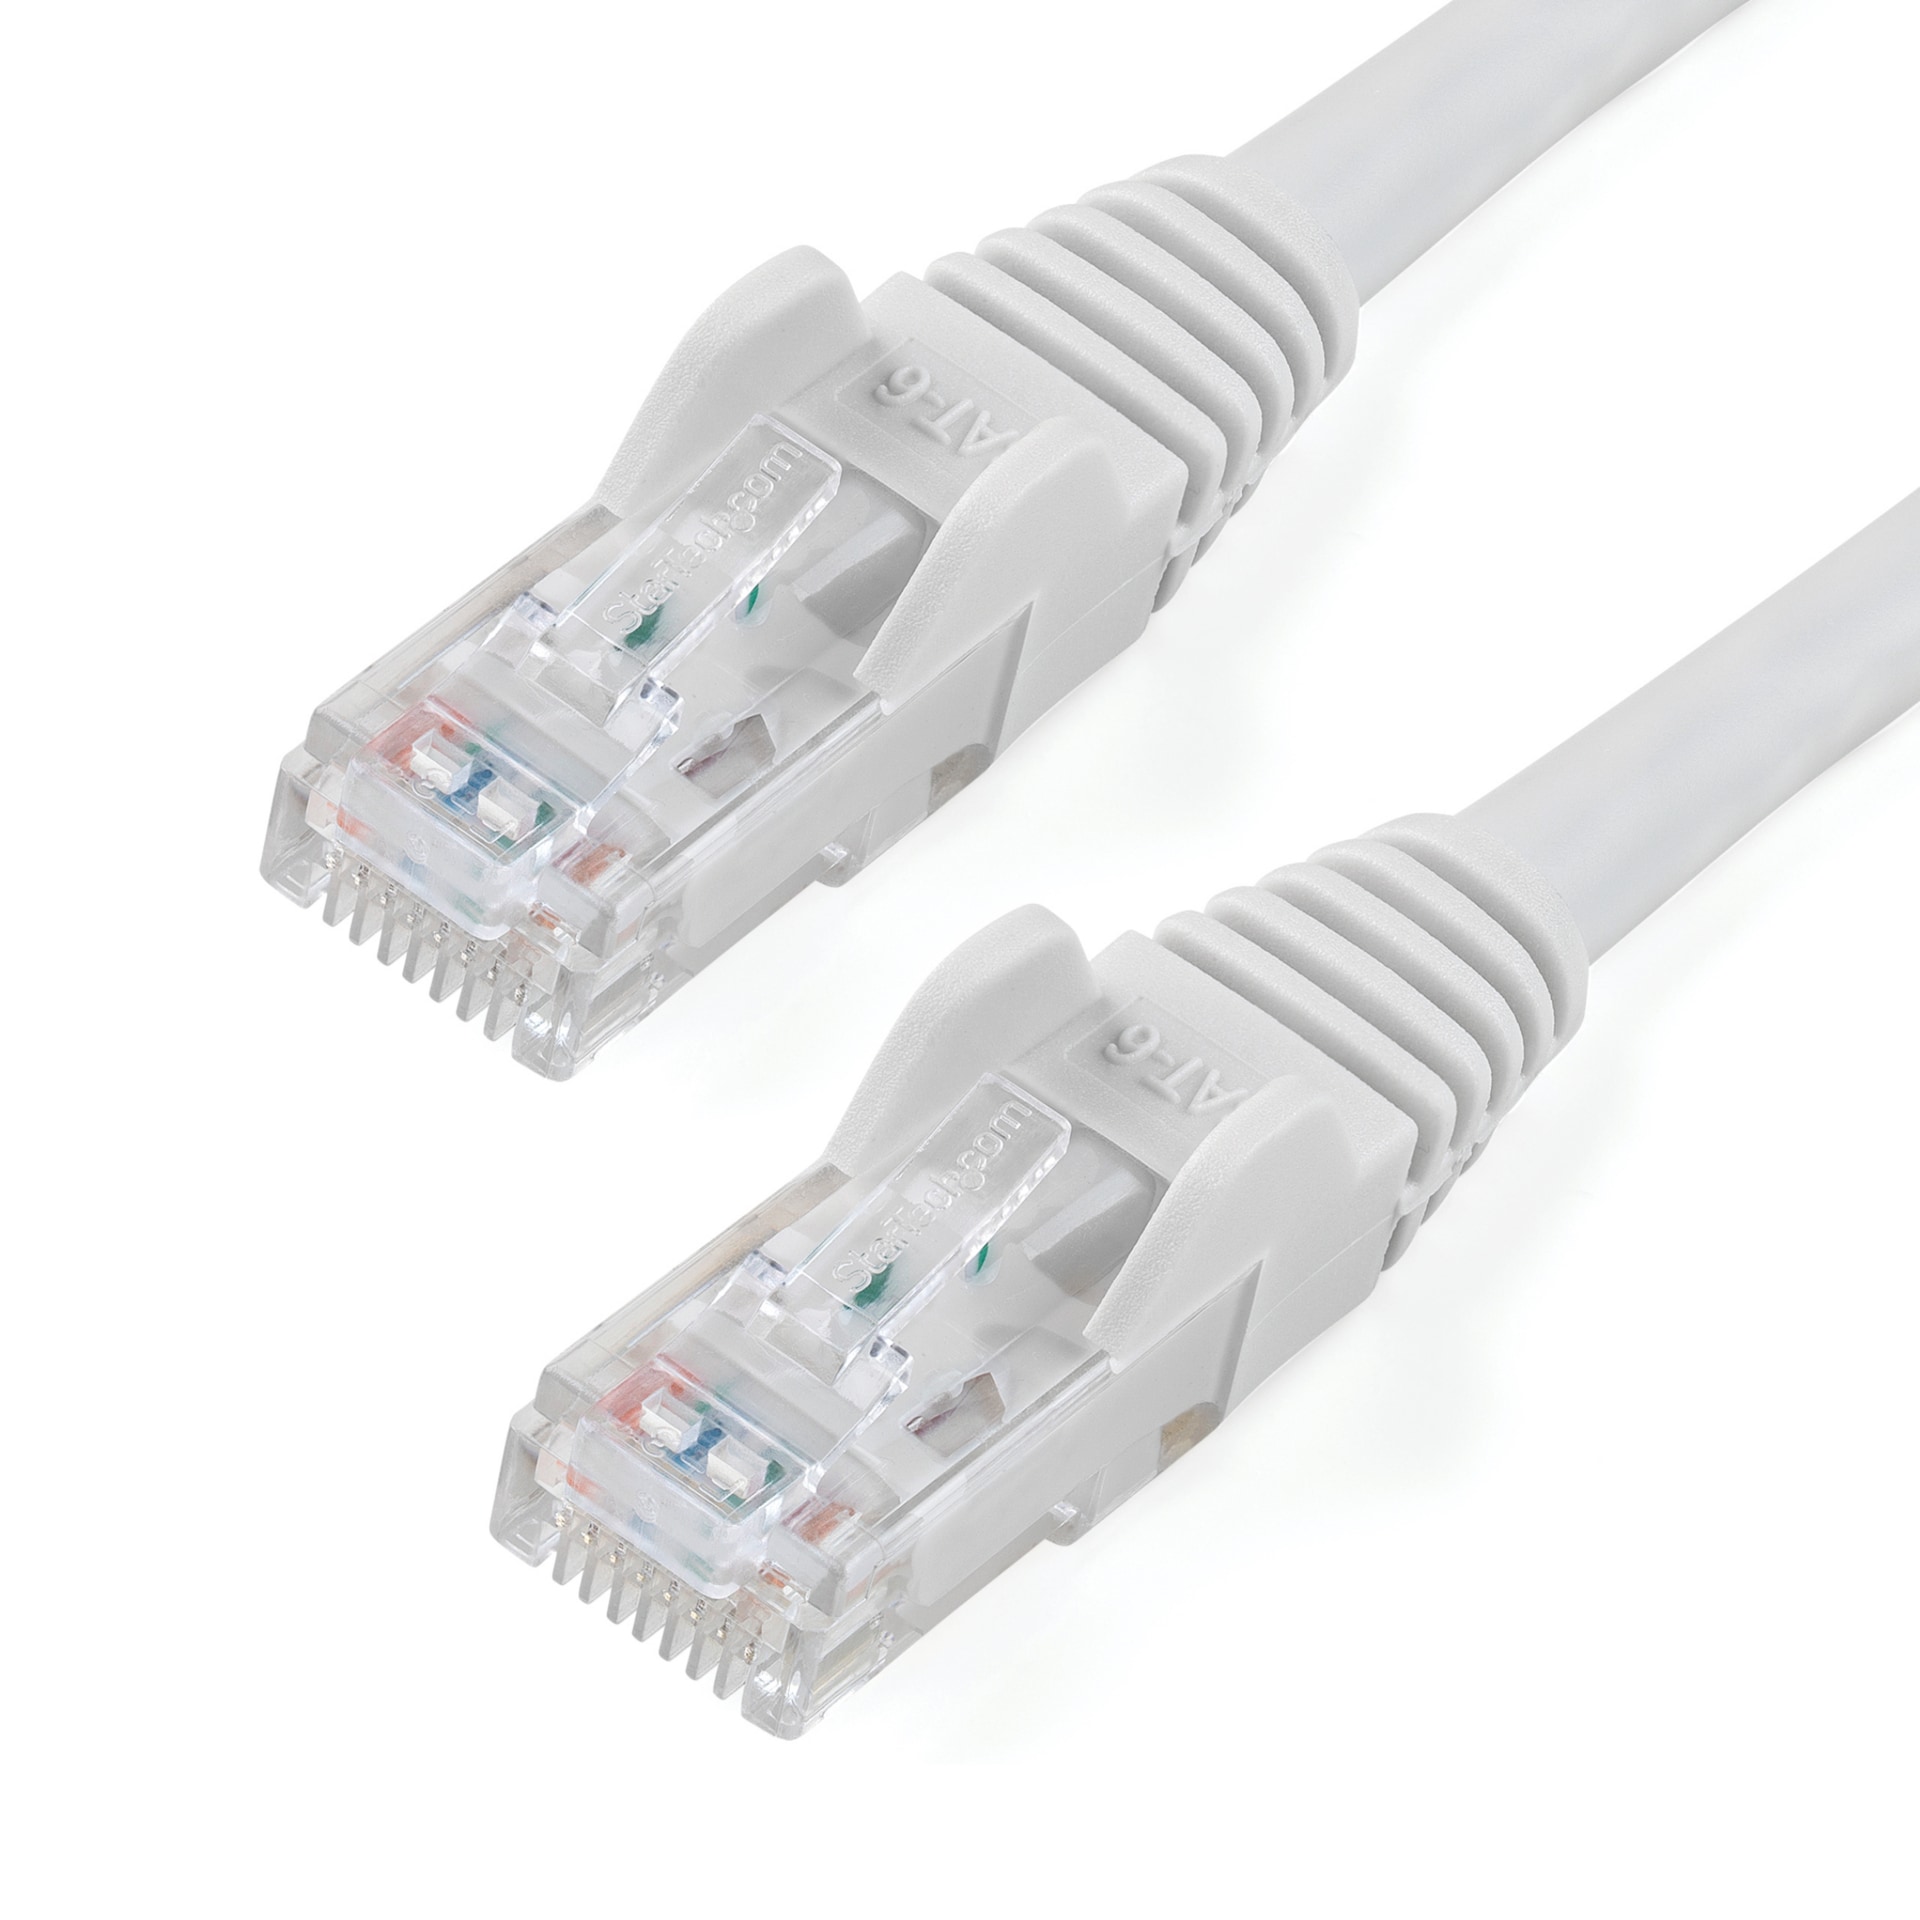 StarTech.com CAT6 Ethernet Cable 100' White 650MHz PoE Snagless Patch Cord